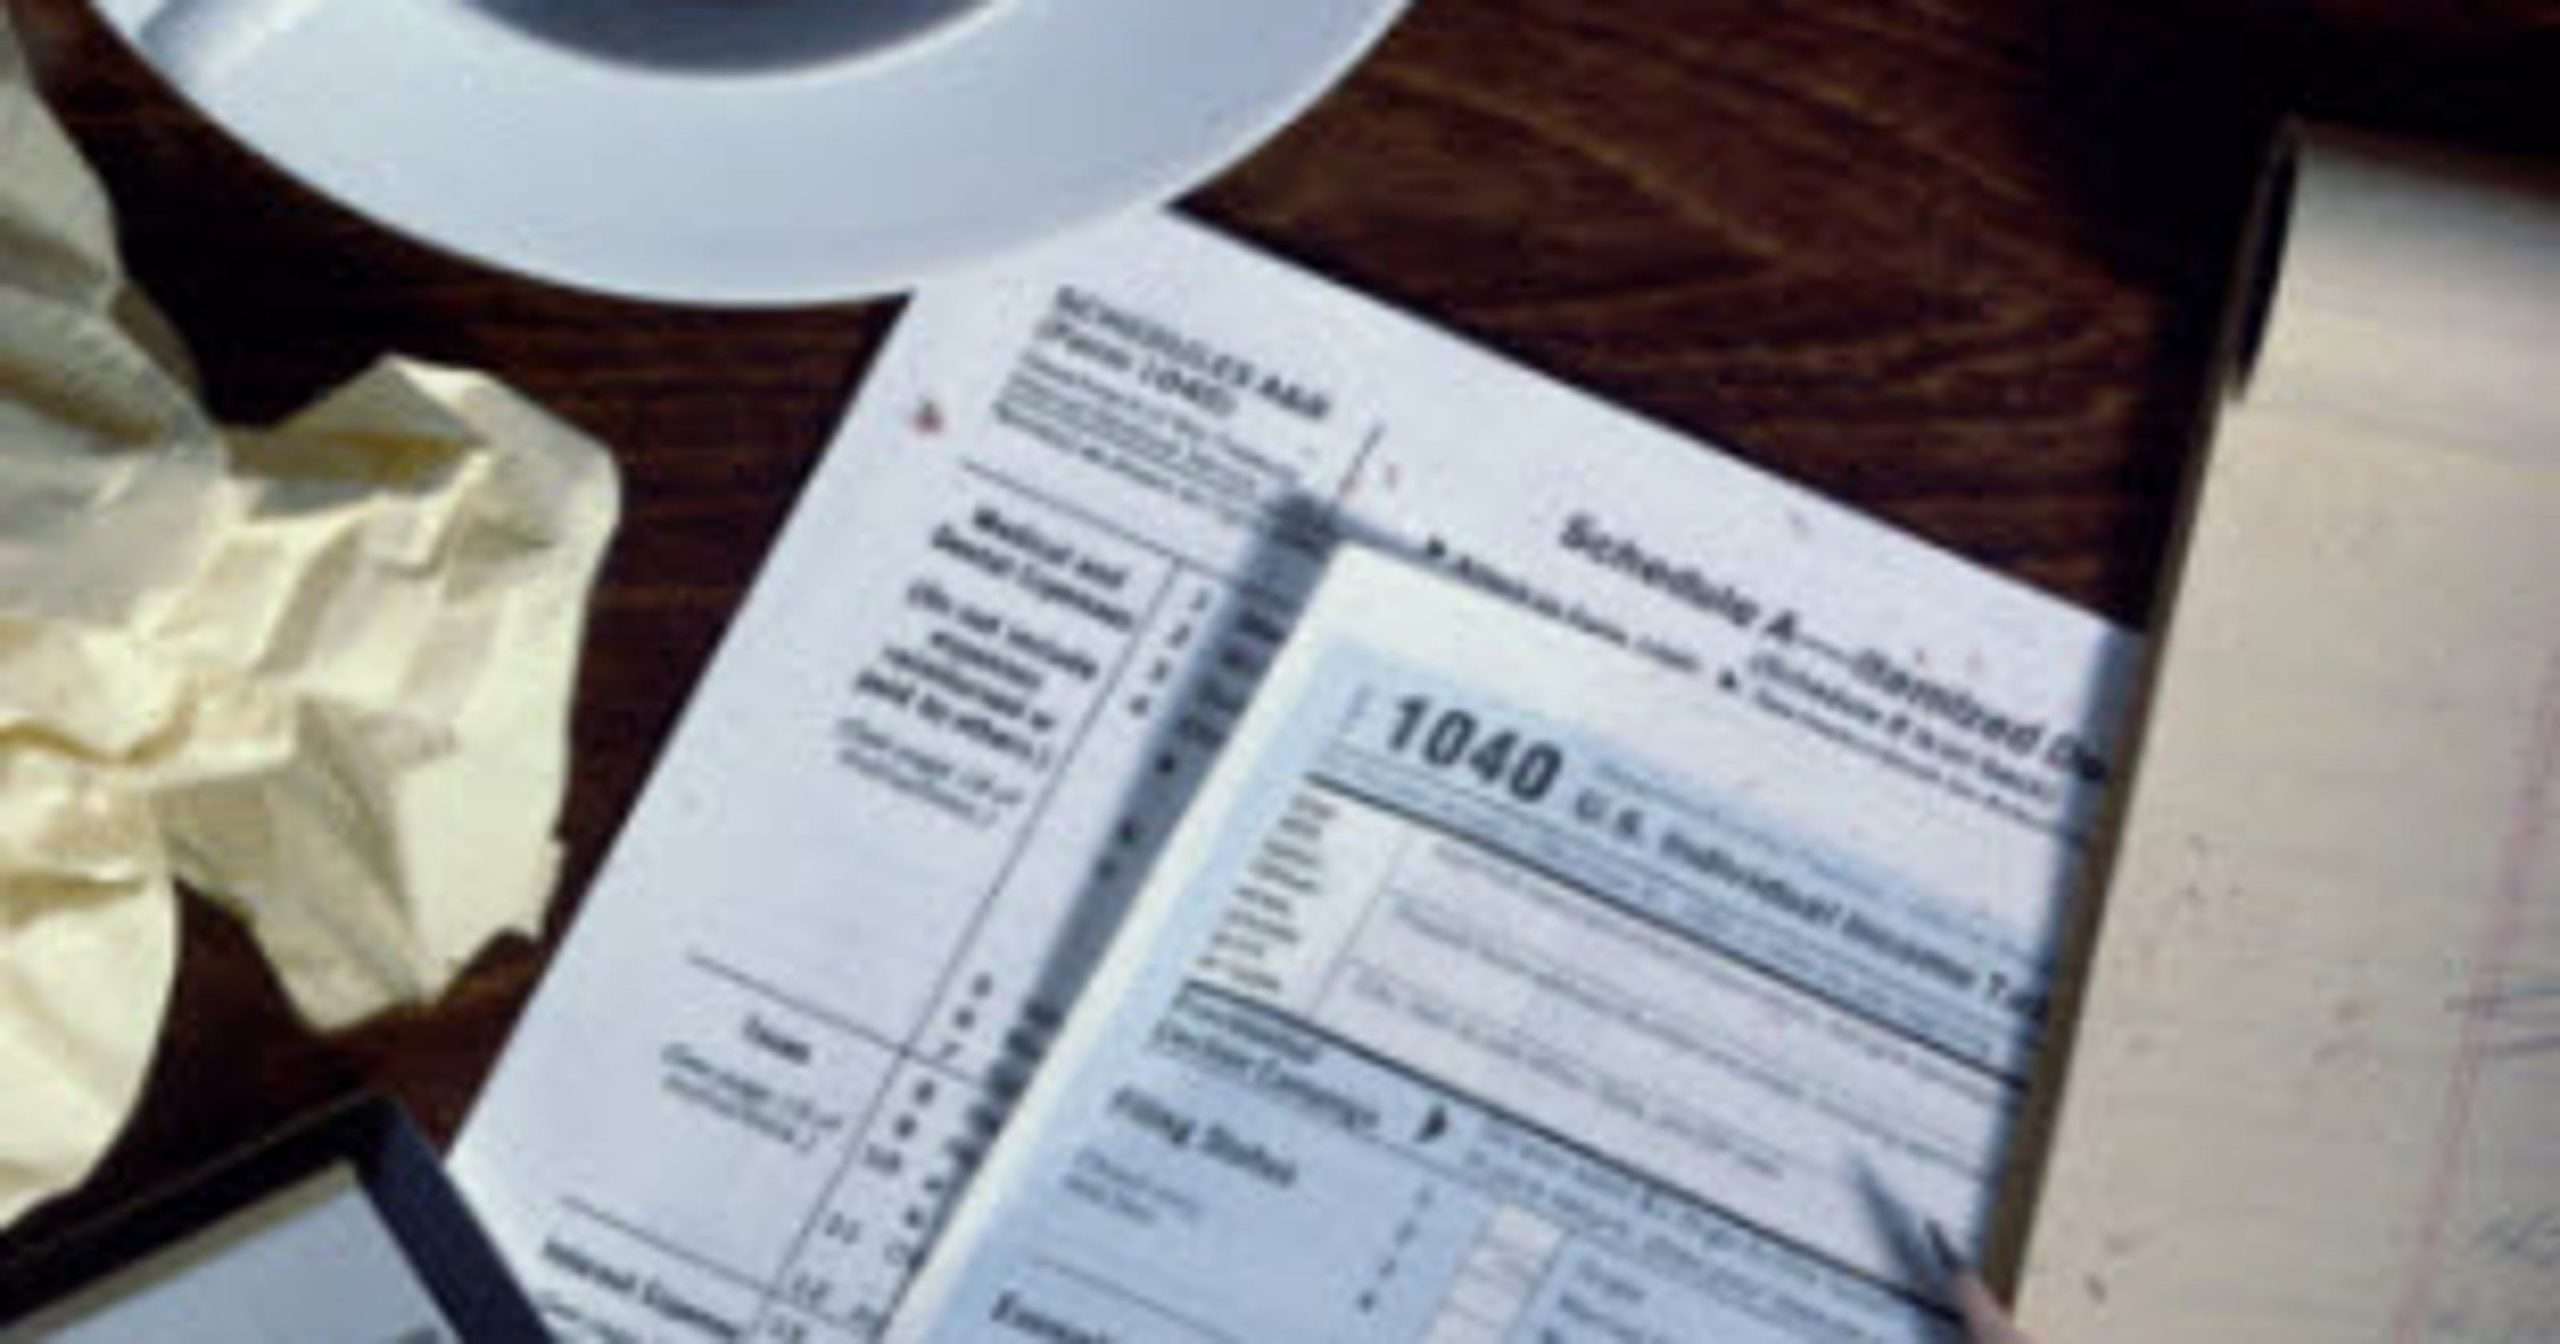 4 things every student needs to know about filing taxes